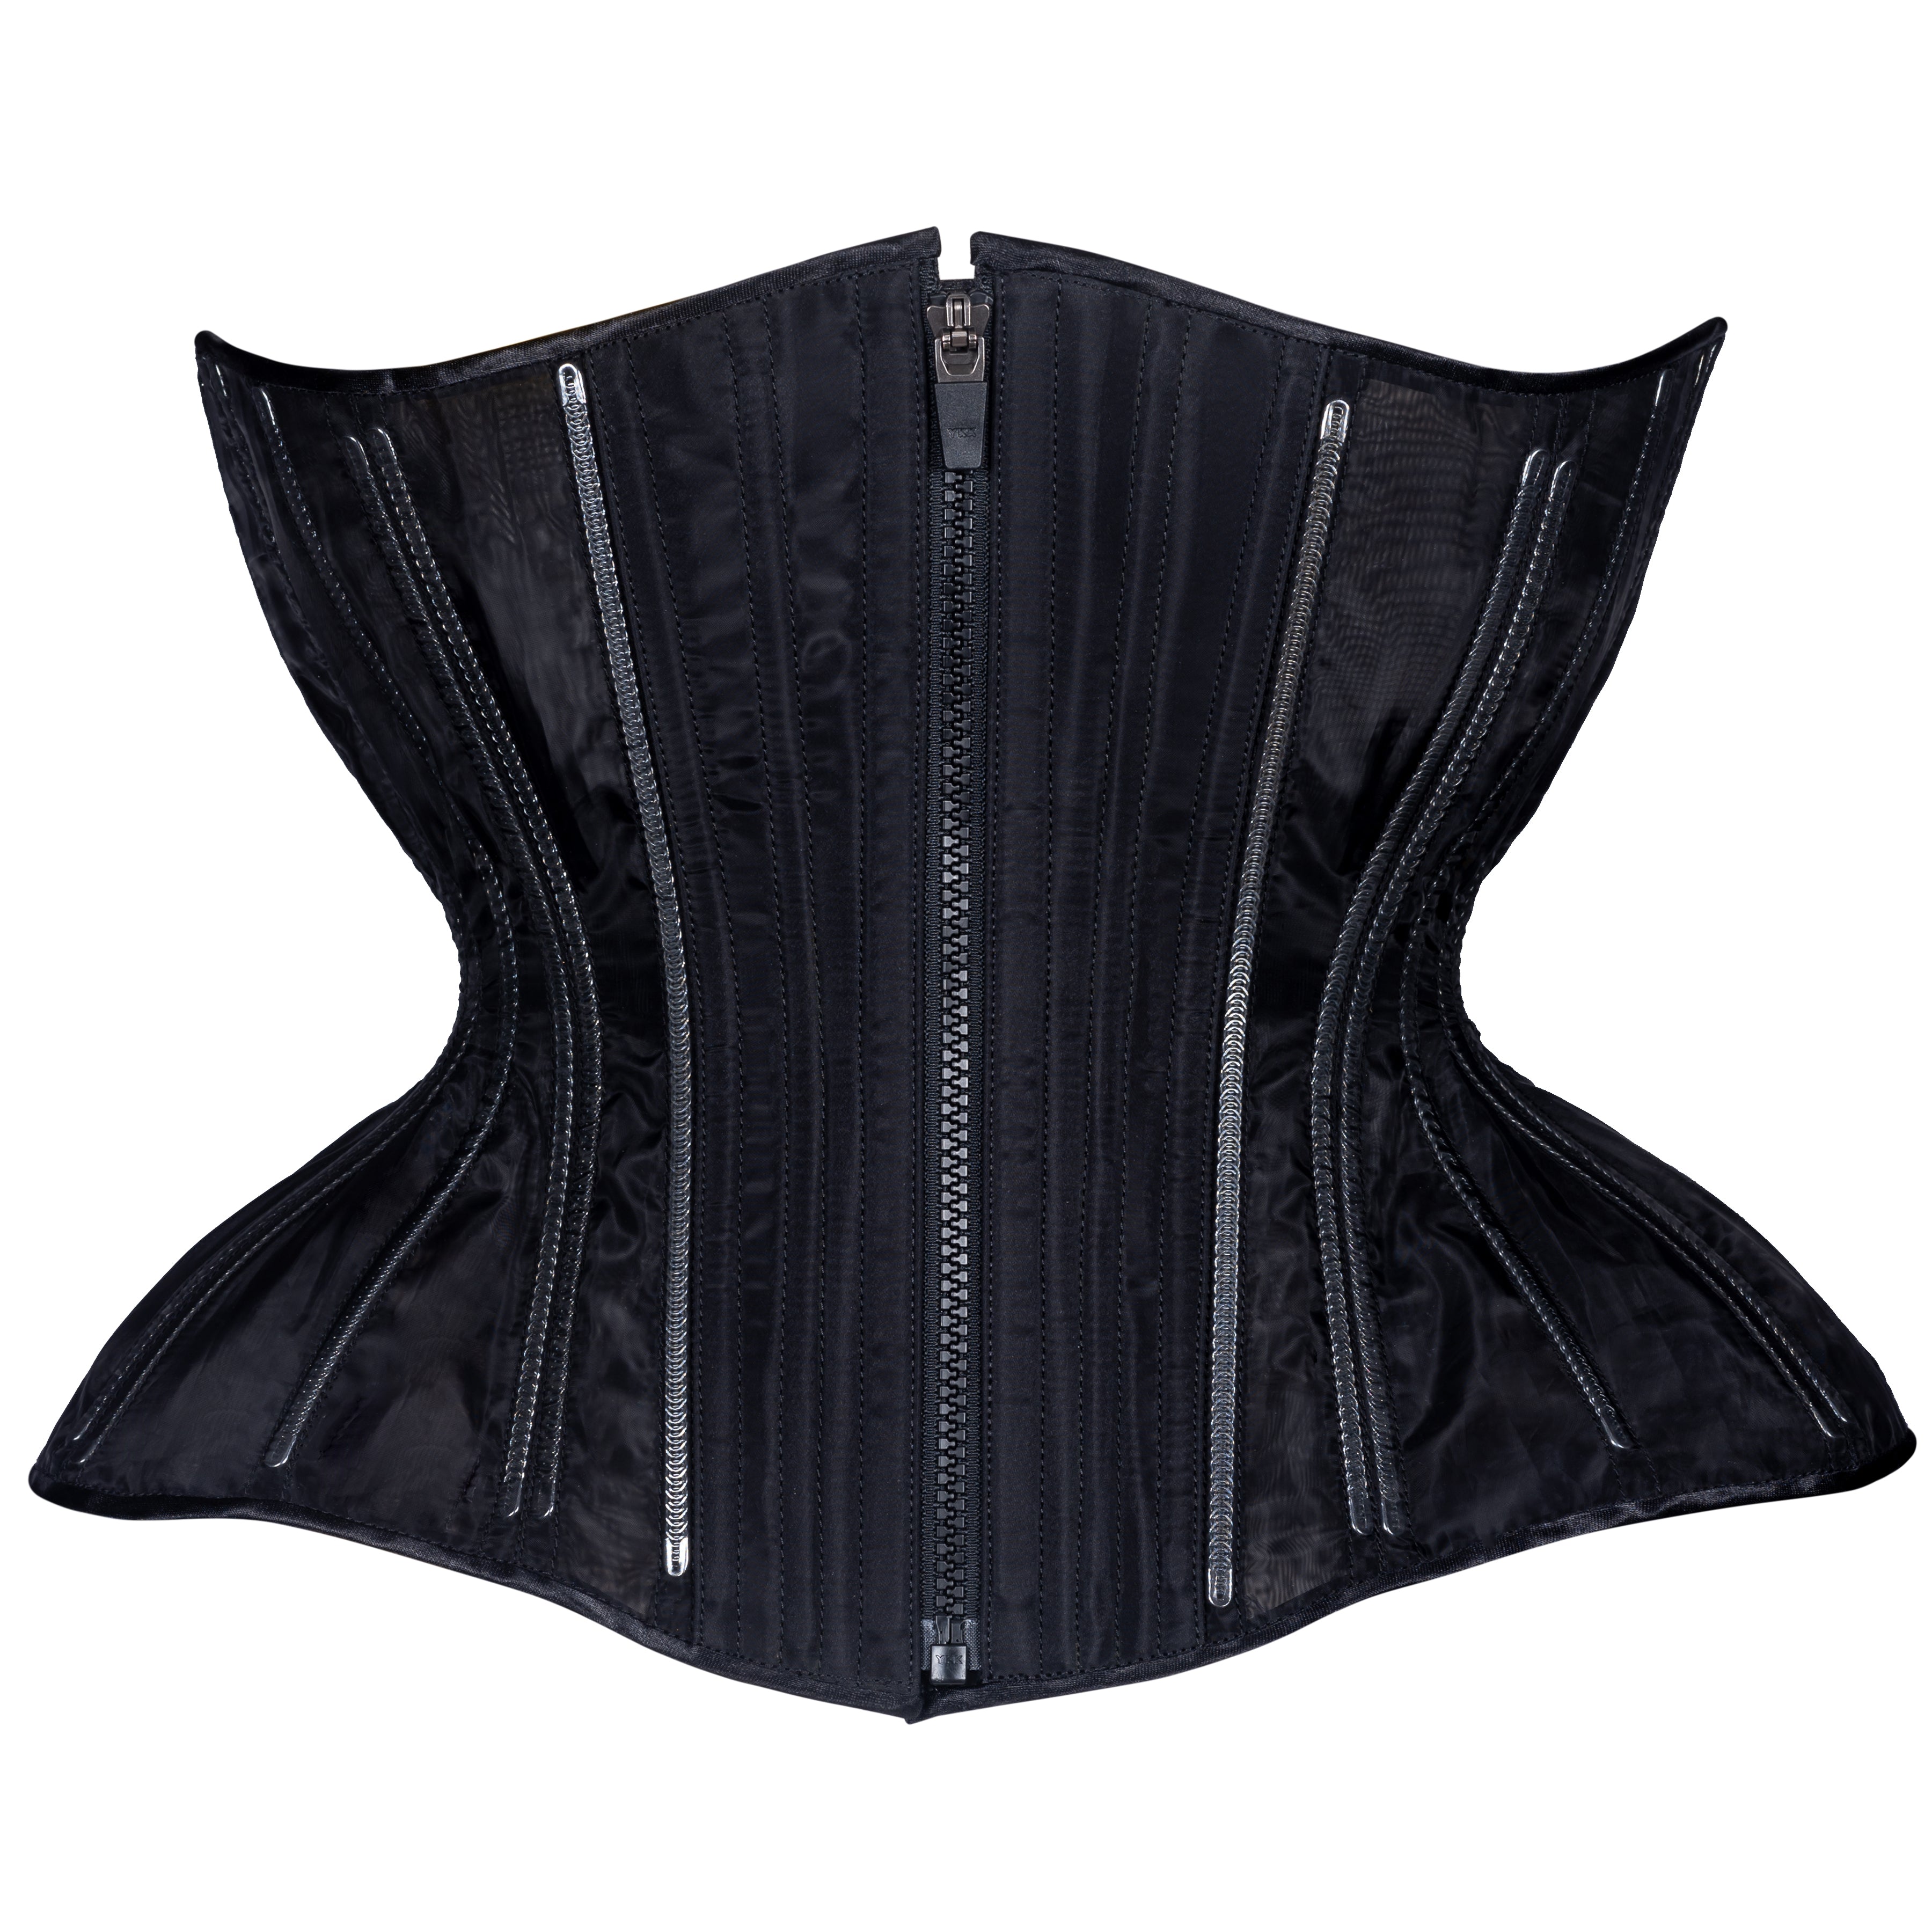 White Button-Up Shirt with Black Corset Fit🖤  Corset fashion outfits,  Edgy outfits, Corset outfit